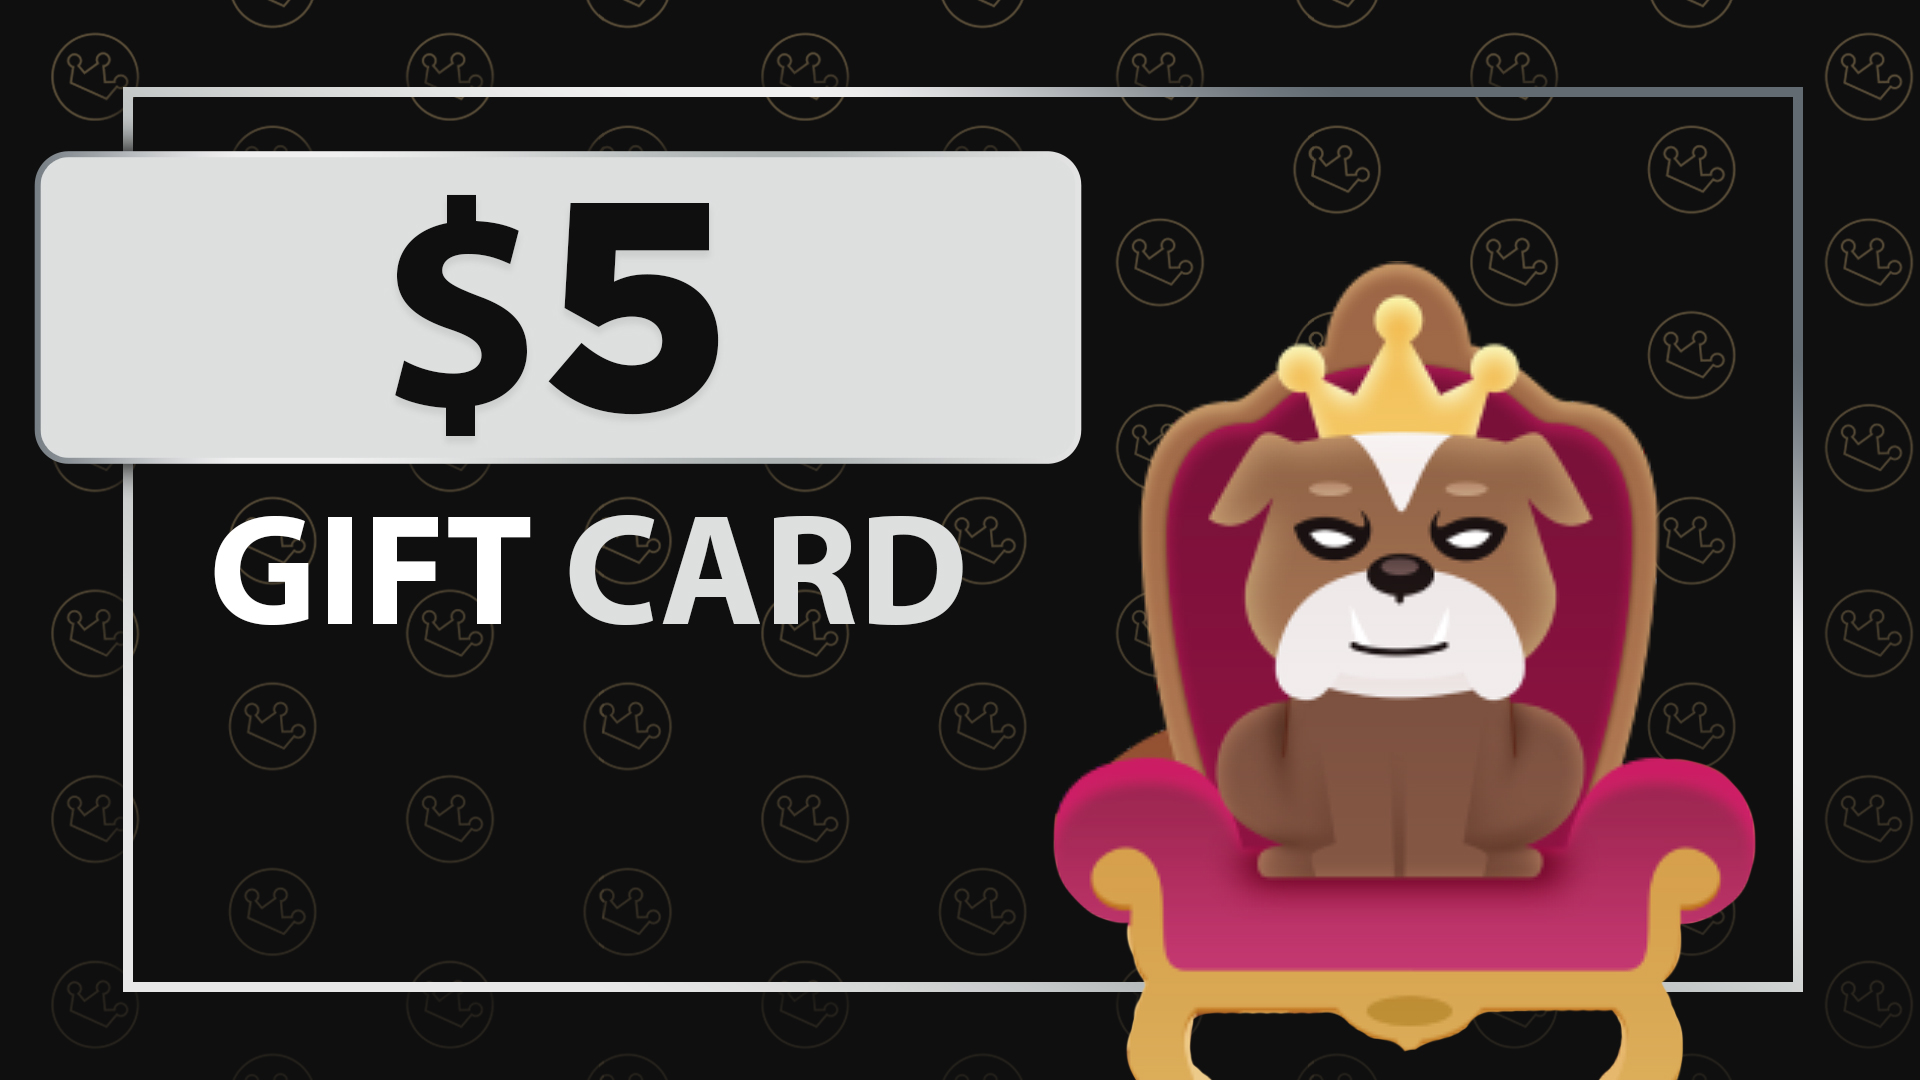 RoyaleCases $5 USD Gift Card 6.09 $